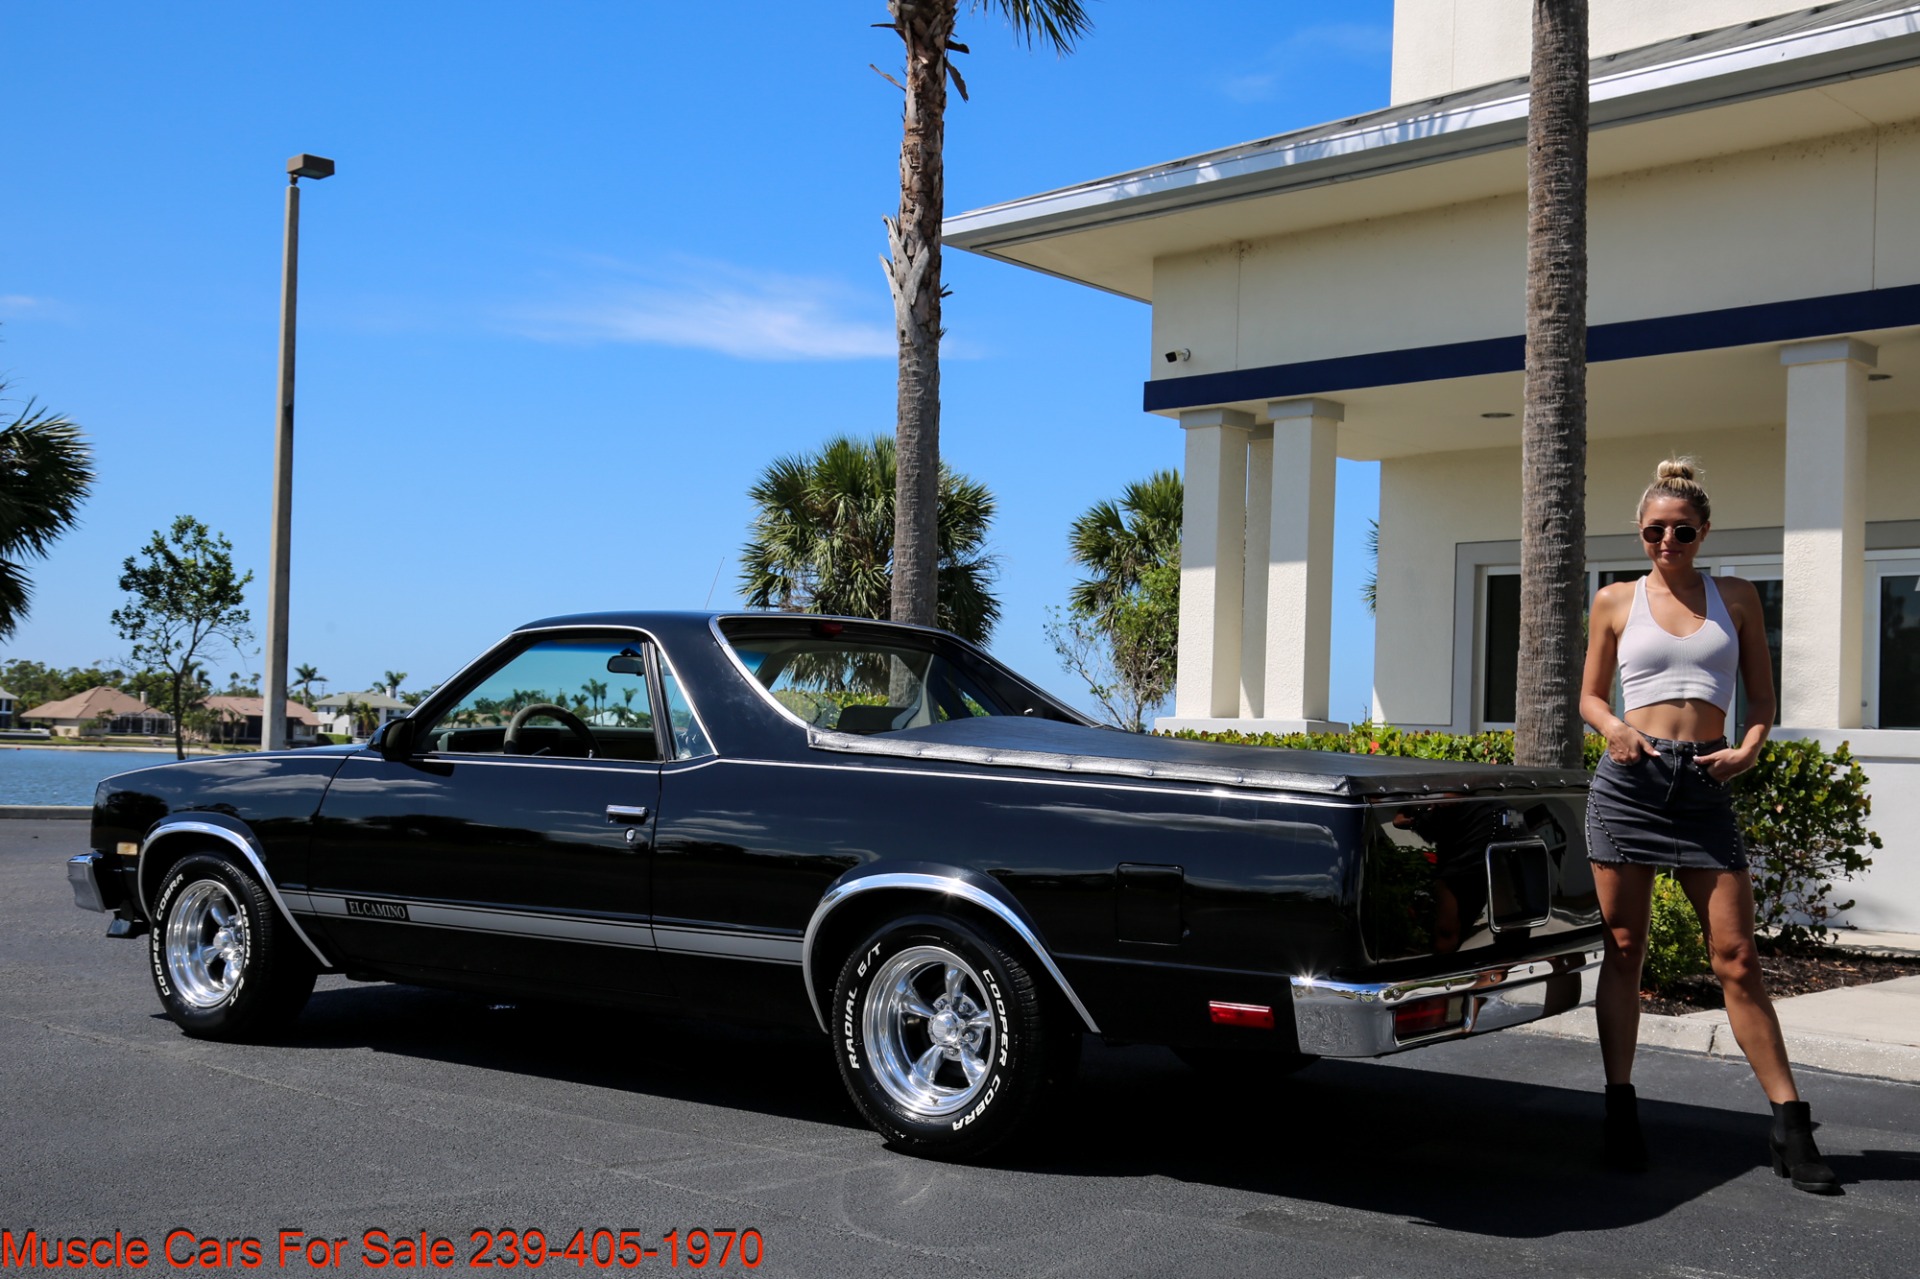 Used 1986 Chevrolet El Camino V8 Auto for sale $18,500 at Muscle Cars for Sale Inc. in Fort Myers FL 33912 3